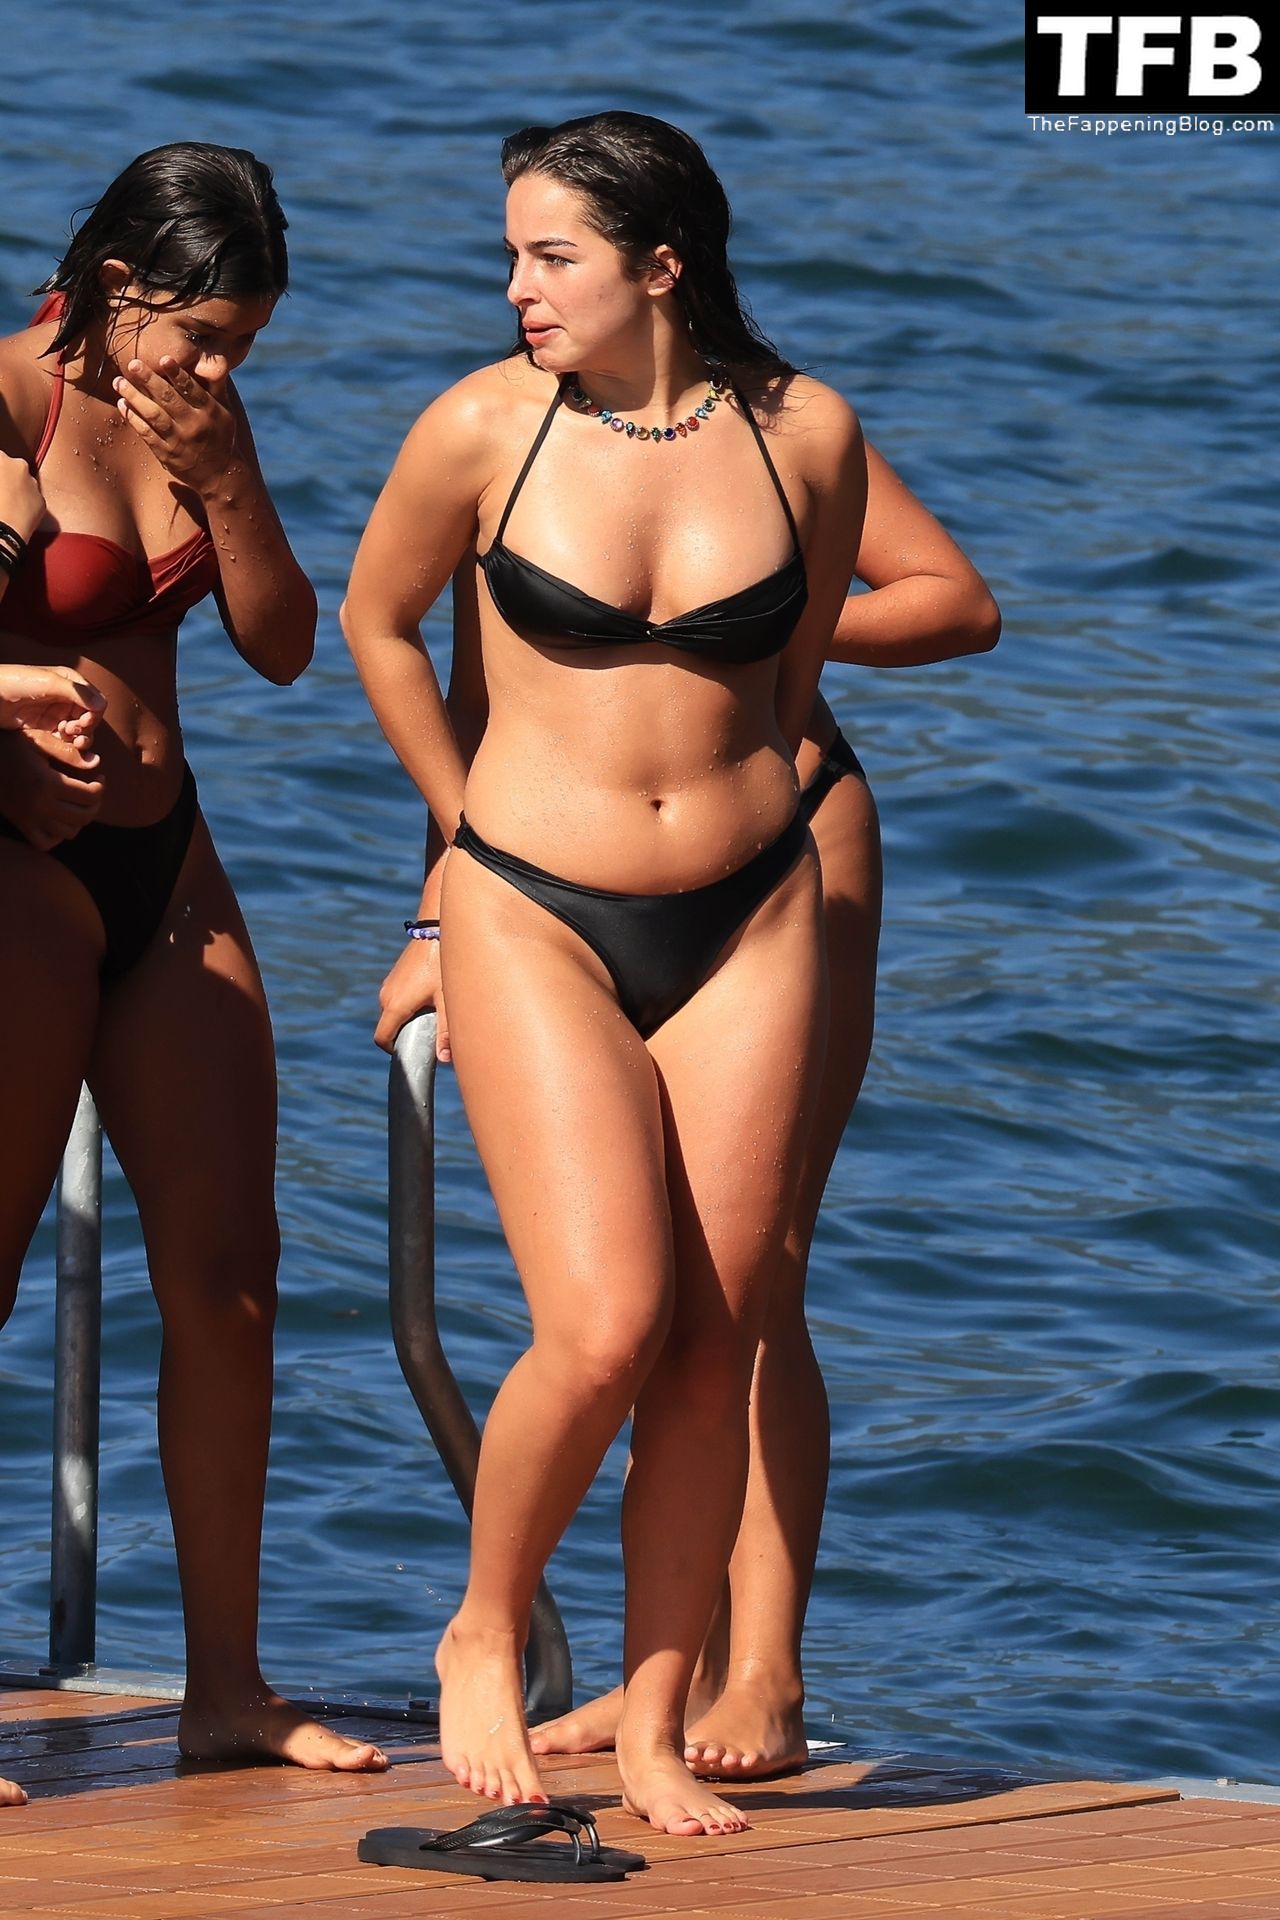 Addison Rae Sexy The Fappening Blog 40 - Addison Rae Displays Her Curves in a Black Bikini on Holiday with Omer Fedi on Lake Como (70 Photos)